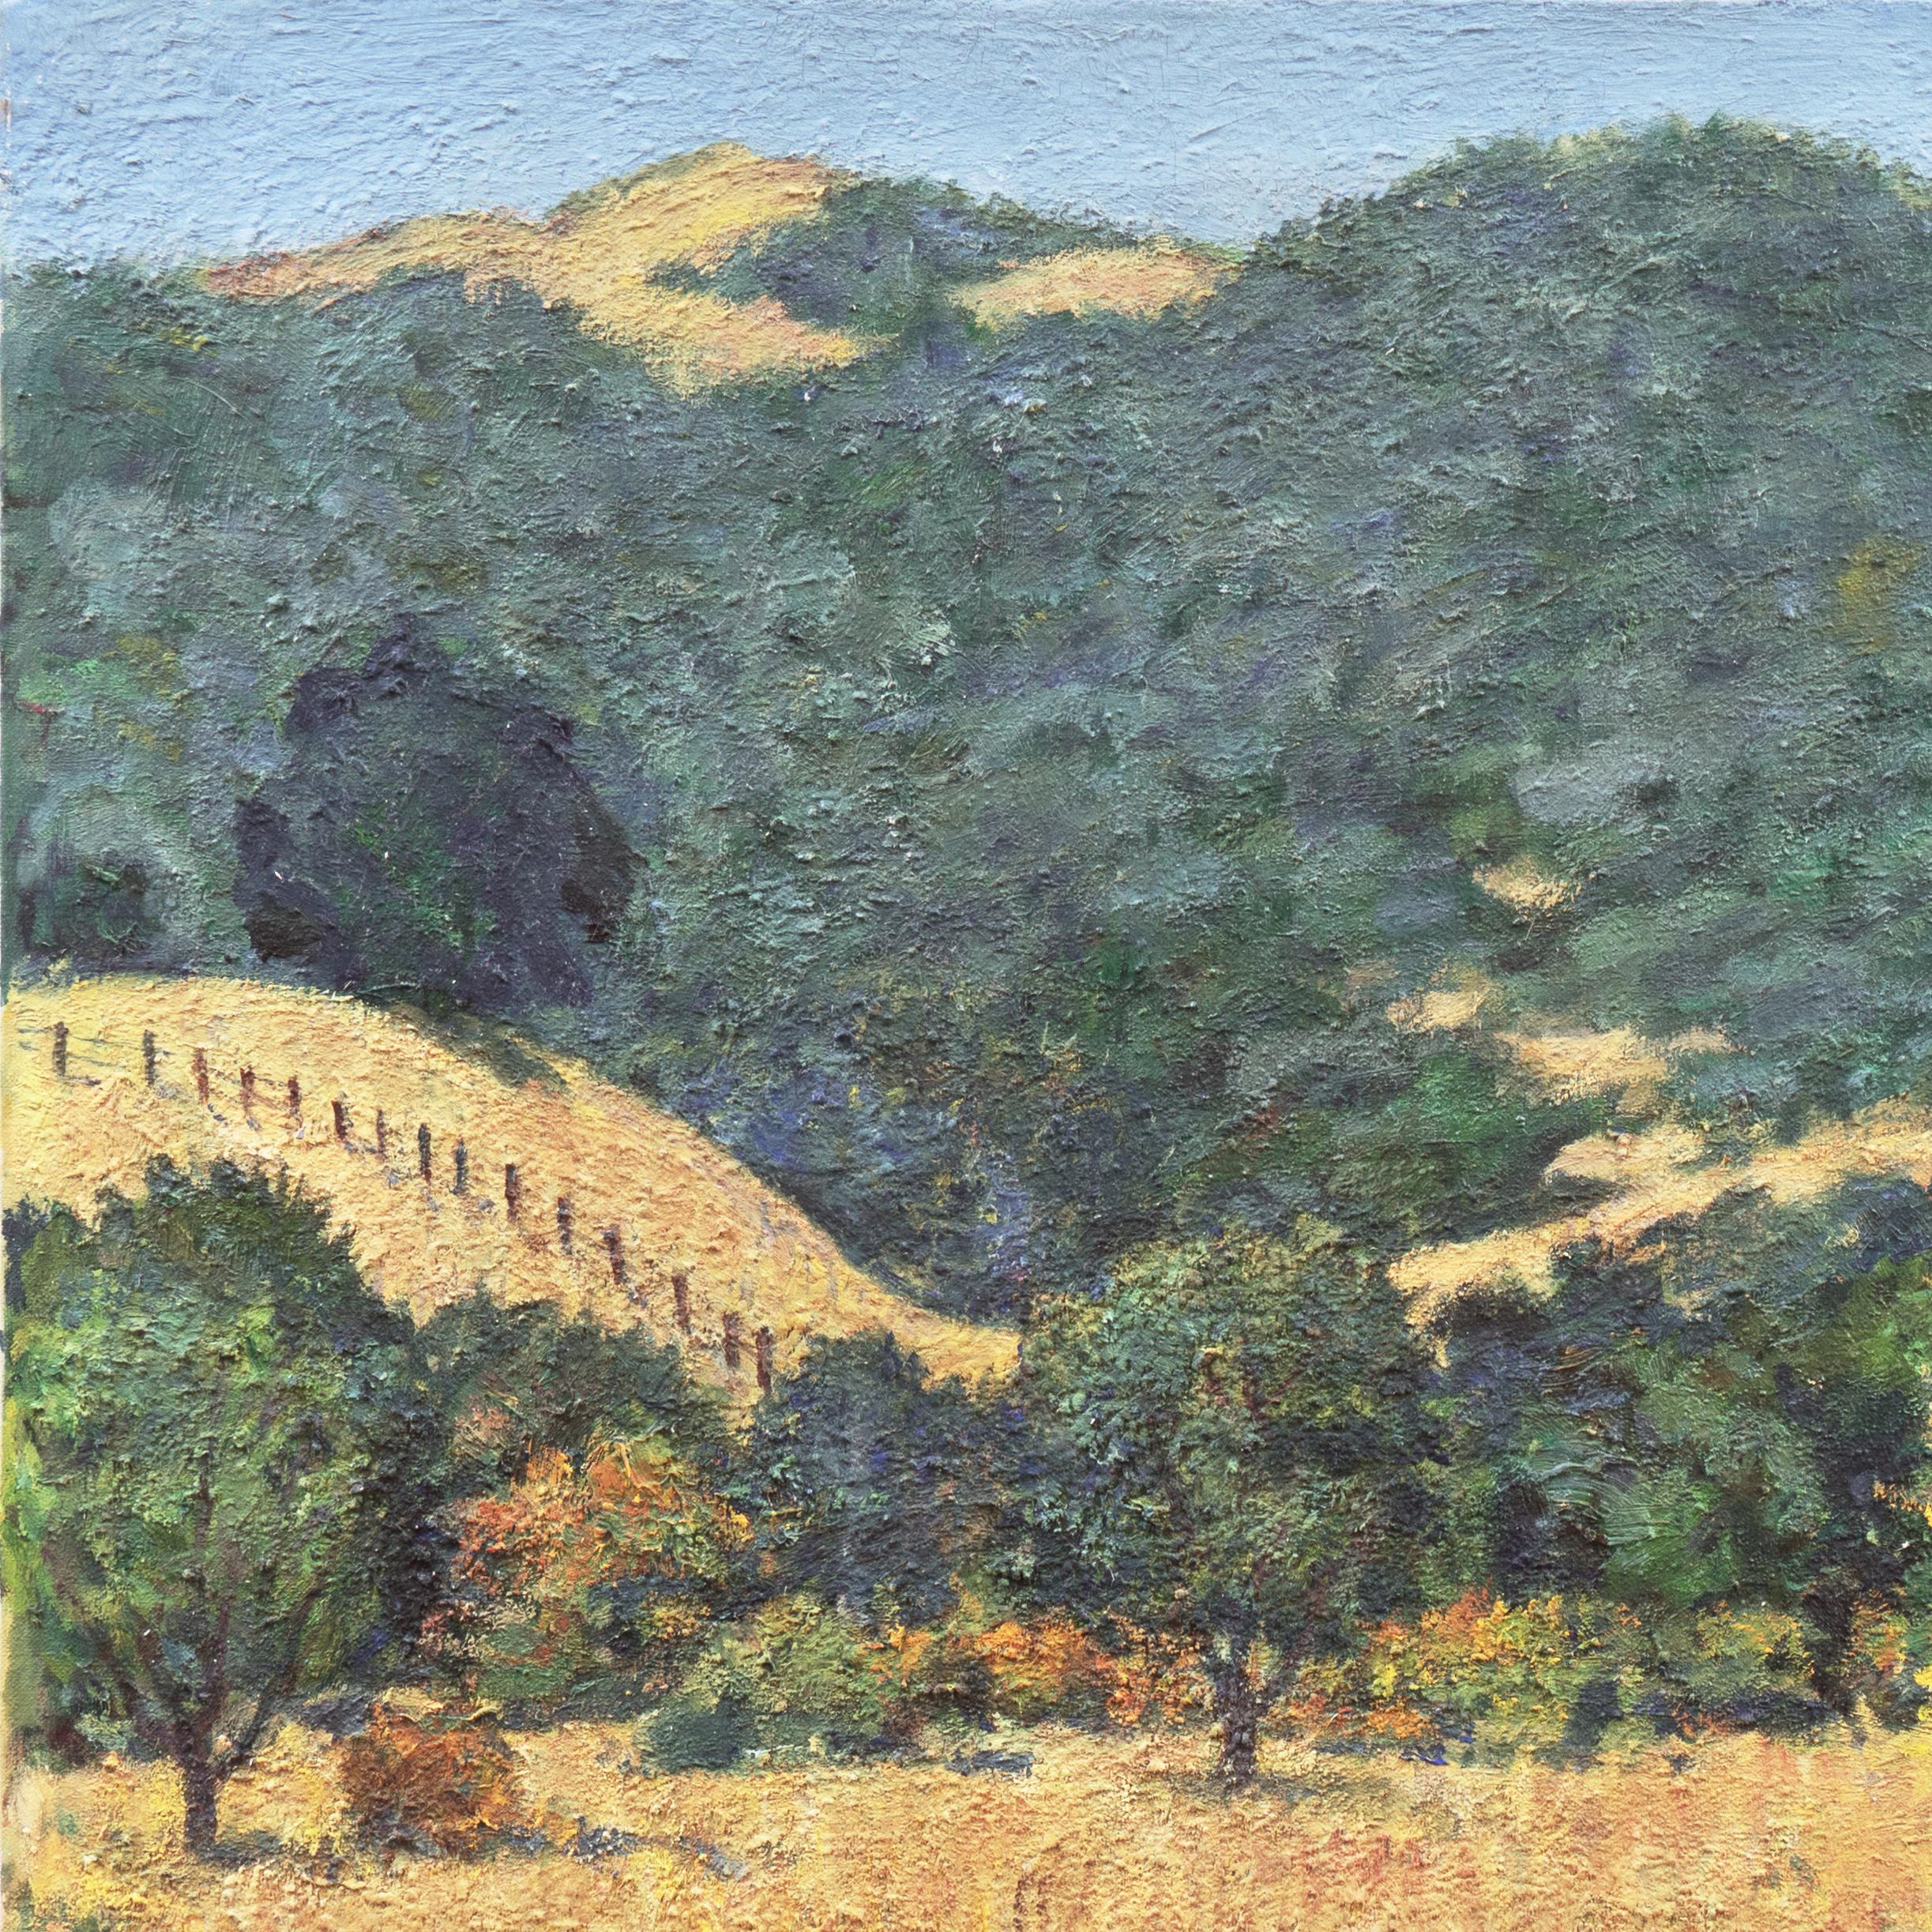 Signed lower right, 'Michel Kady' (American, 1901-1977) and dated 1969.

A large, oil on canvas landscape showing a view of rolling California hills in springtime with new blossoms on the trees beneath a an azure sky. 

Displayed in a substantial